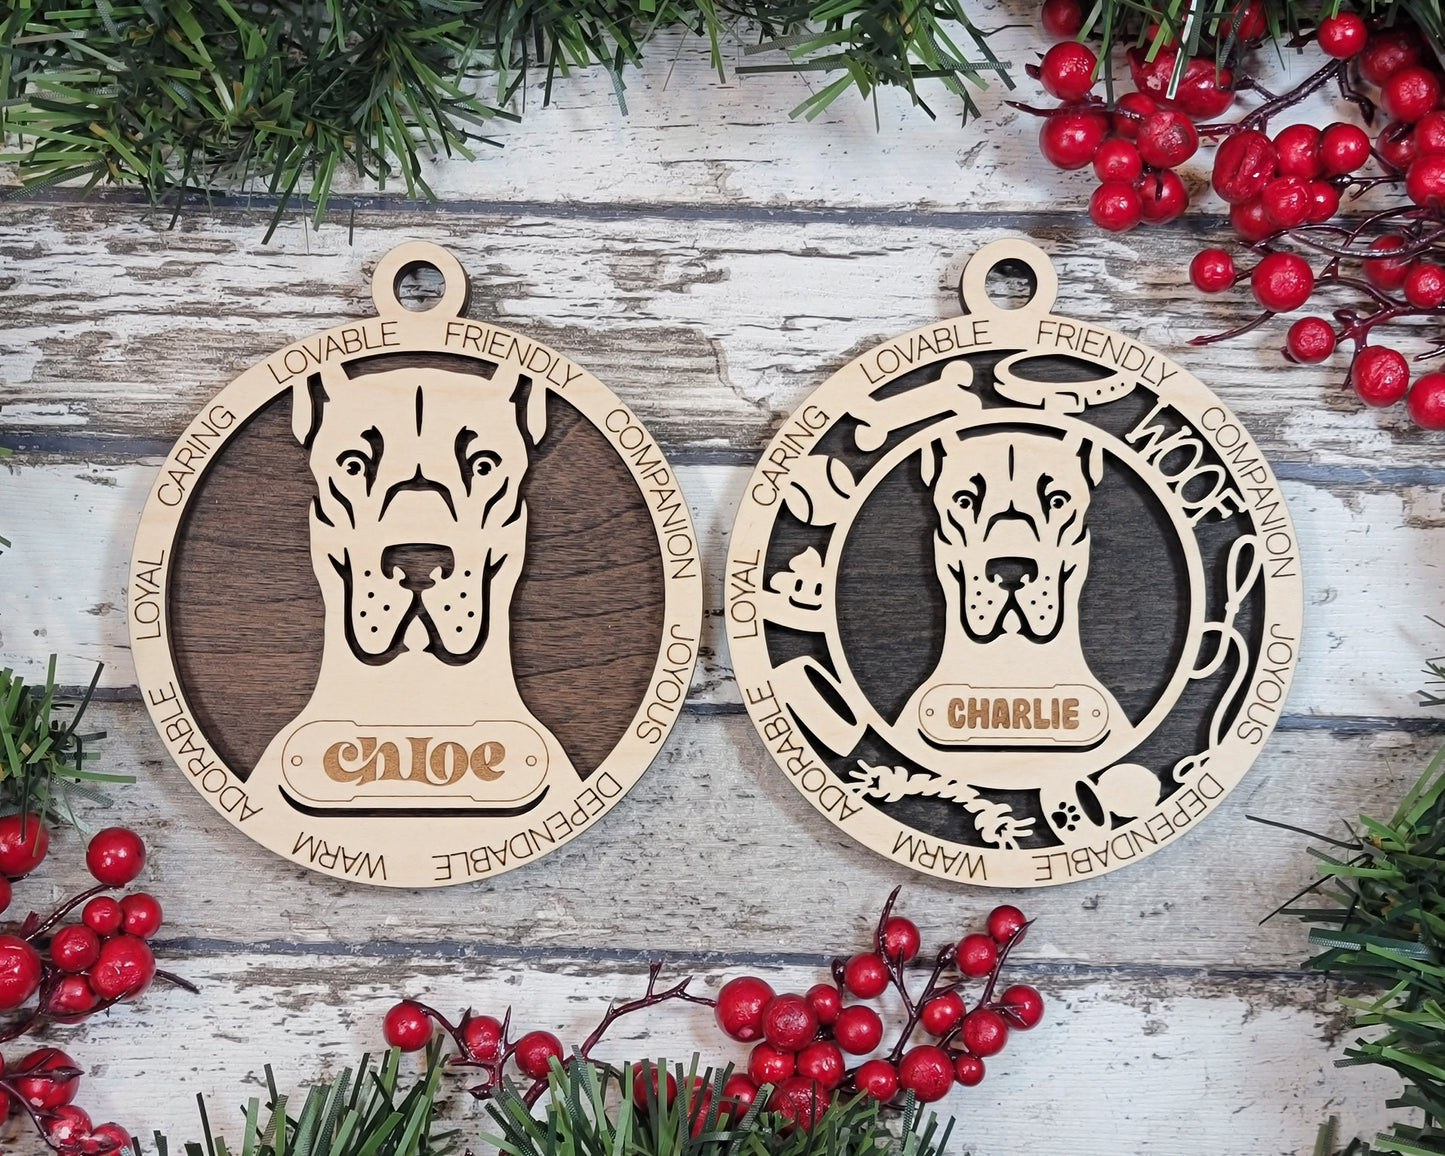 Great Dane - Adorable Dog Ornaments - 2 Ornaments included - SVG, PDF, AI File Download - Sized for Glowforge